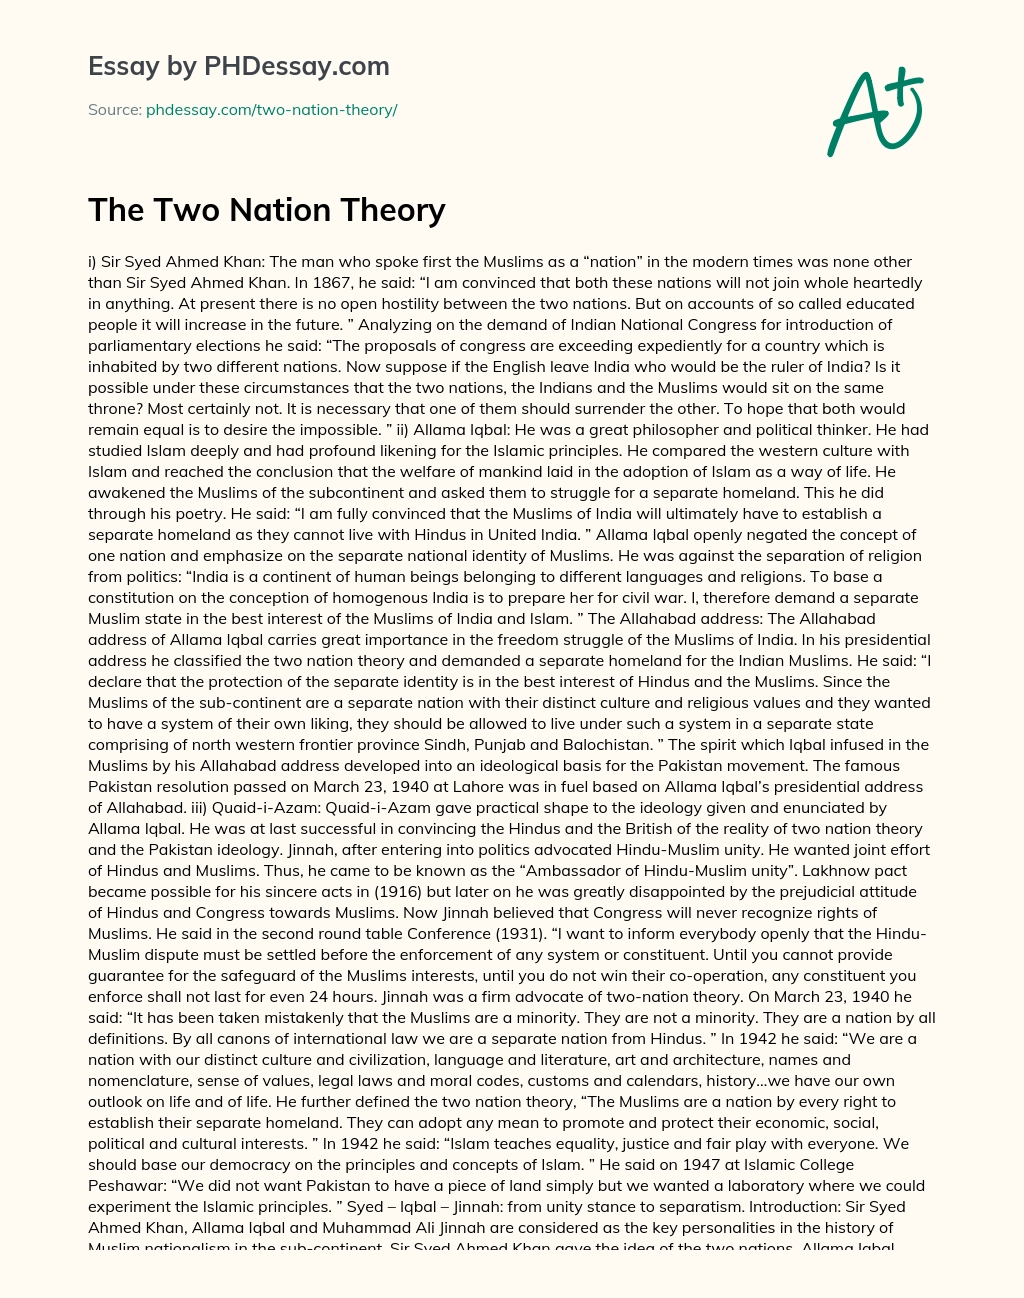 two nation theory essay